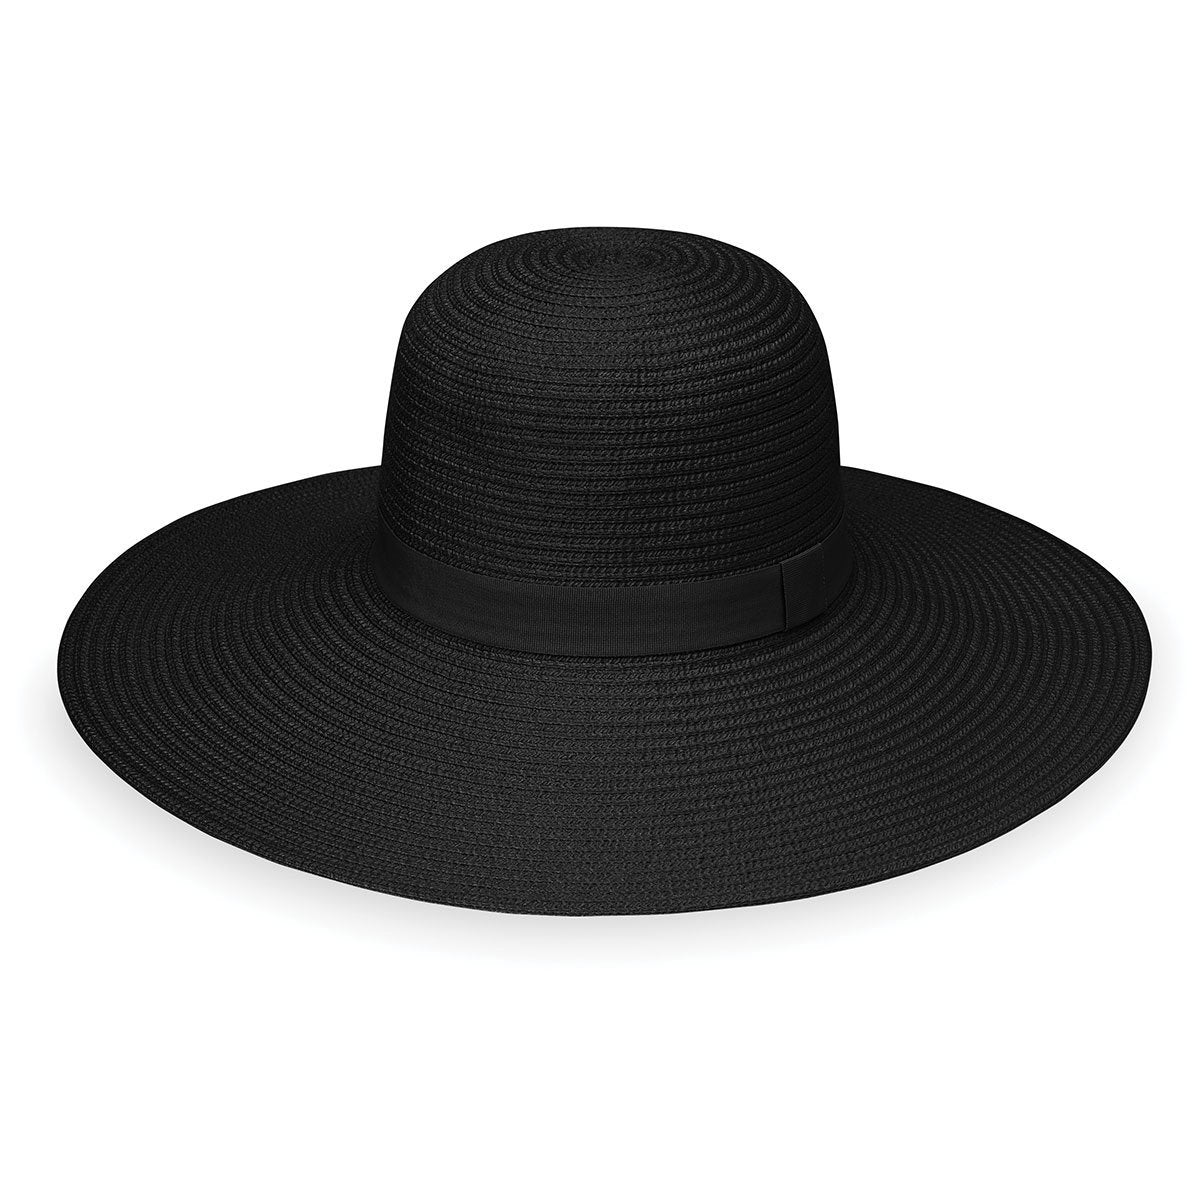 Featuring The Aria Ladies' Big Wide Brim Packable Sun Hat in Black from Wallaroo